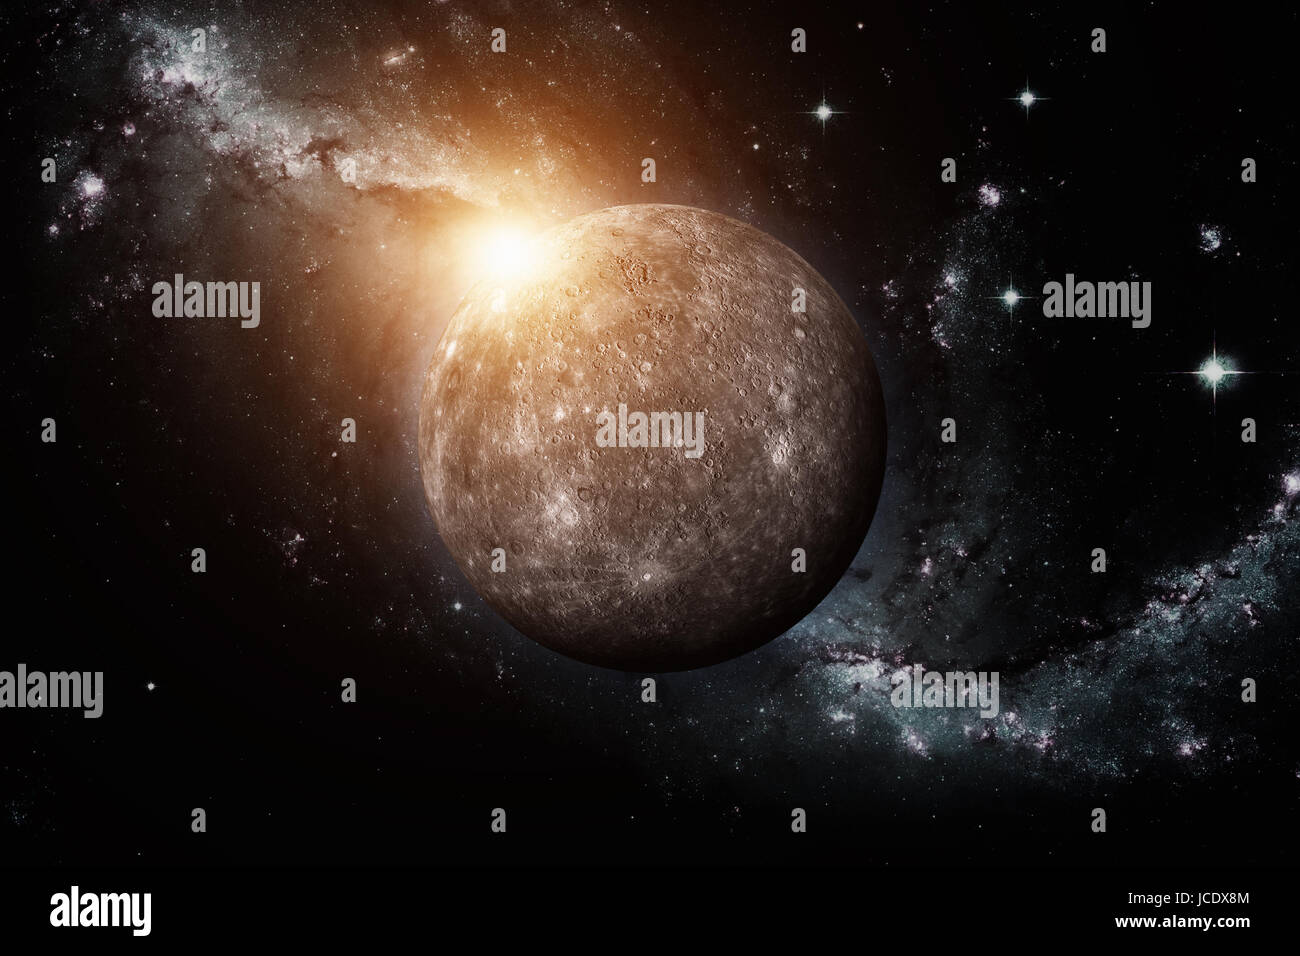 Solar System Mercury It Is The Smallest And Closest To